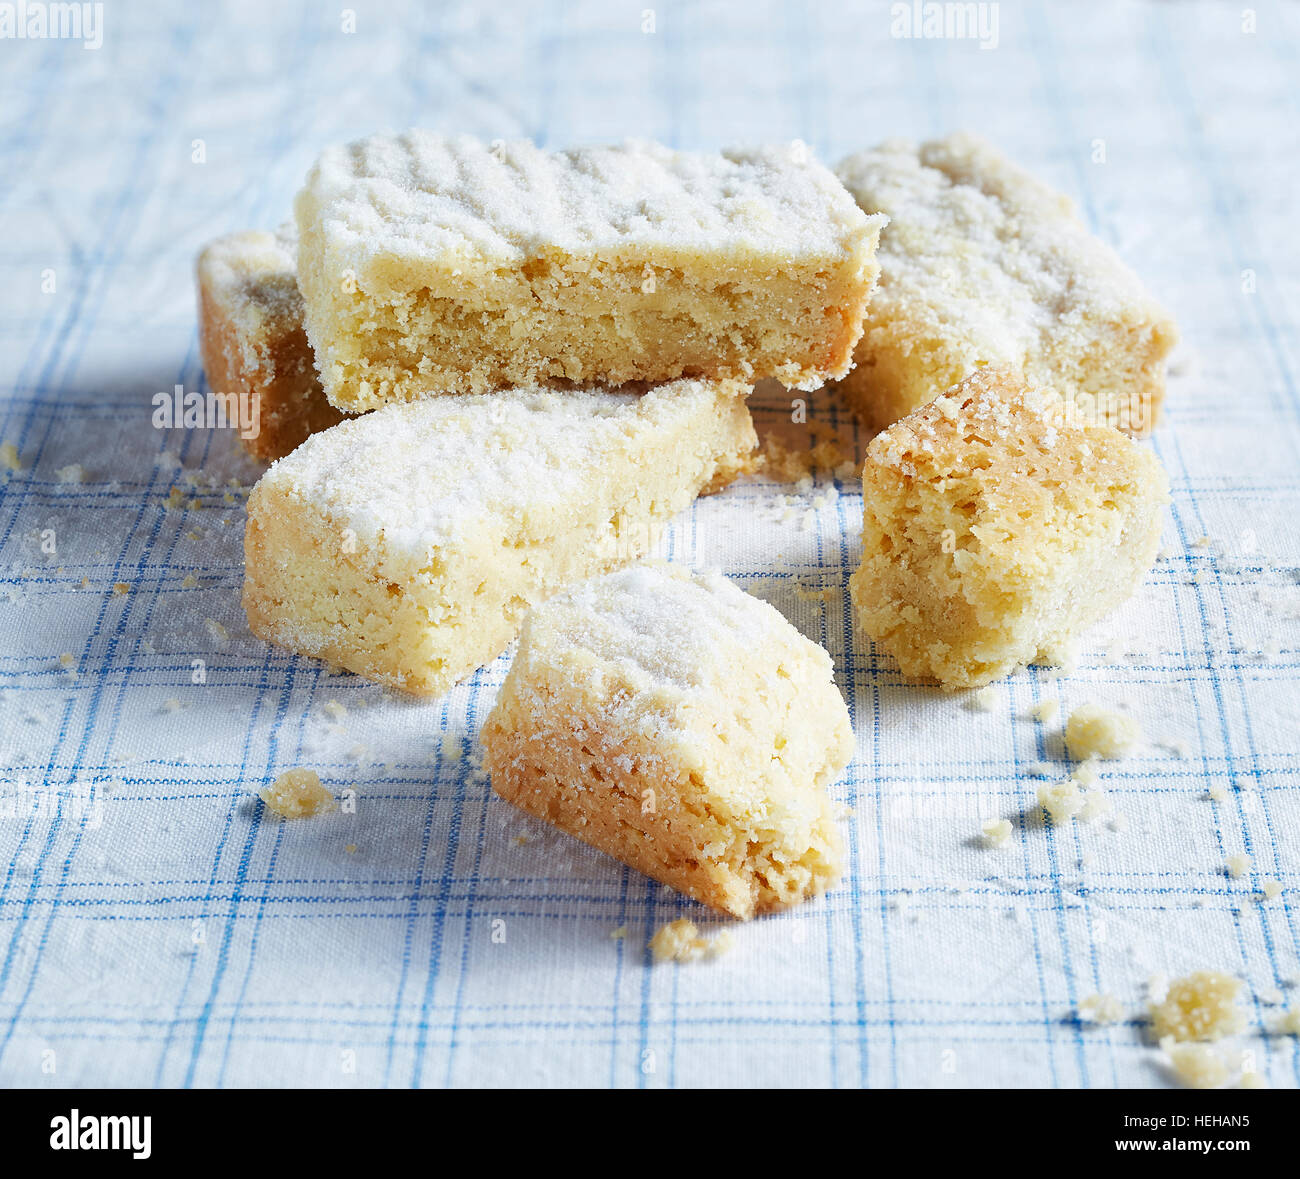 Shortbread, crumbly, crumbs, blue check table cloth, butter, biscuit, Scottish, traditional, food, sweet, stacked dusted icing sugar texture tea t Stock Photo